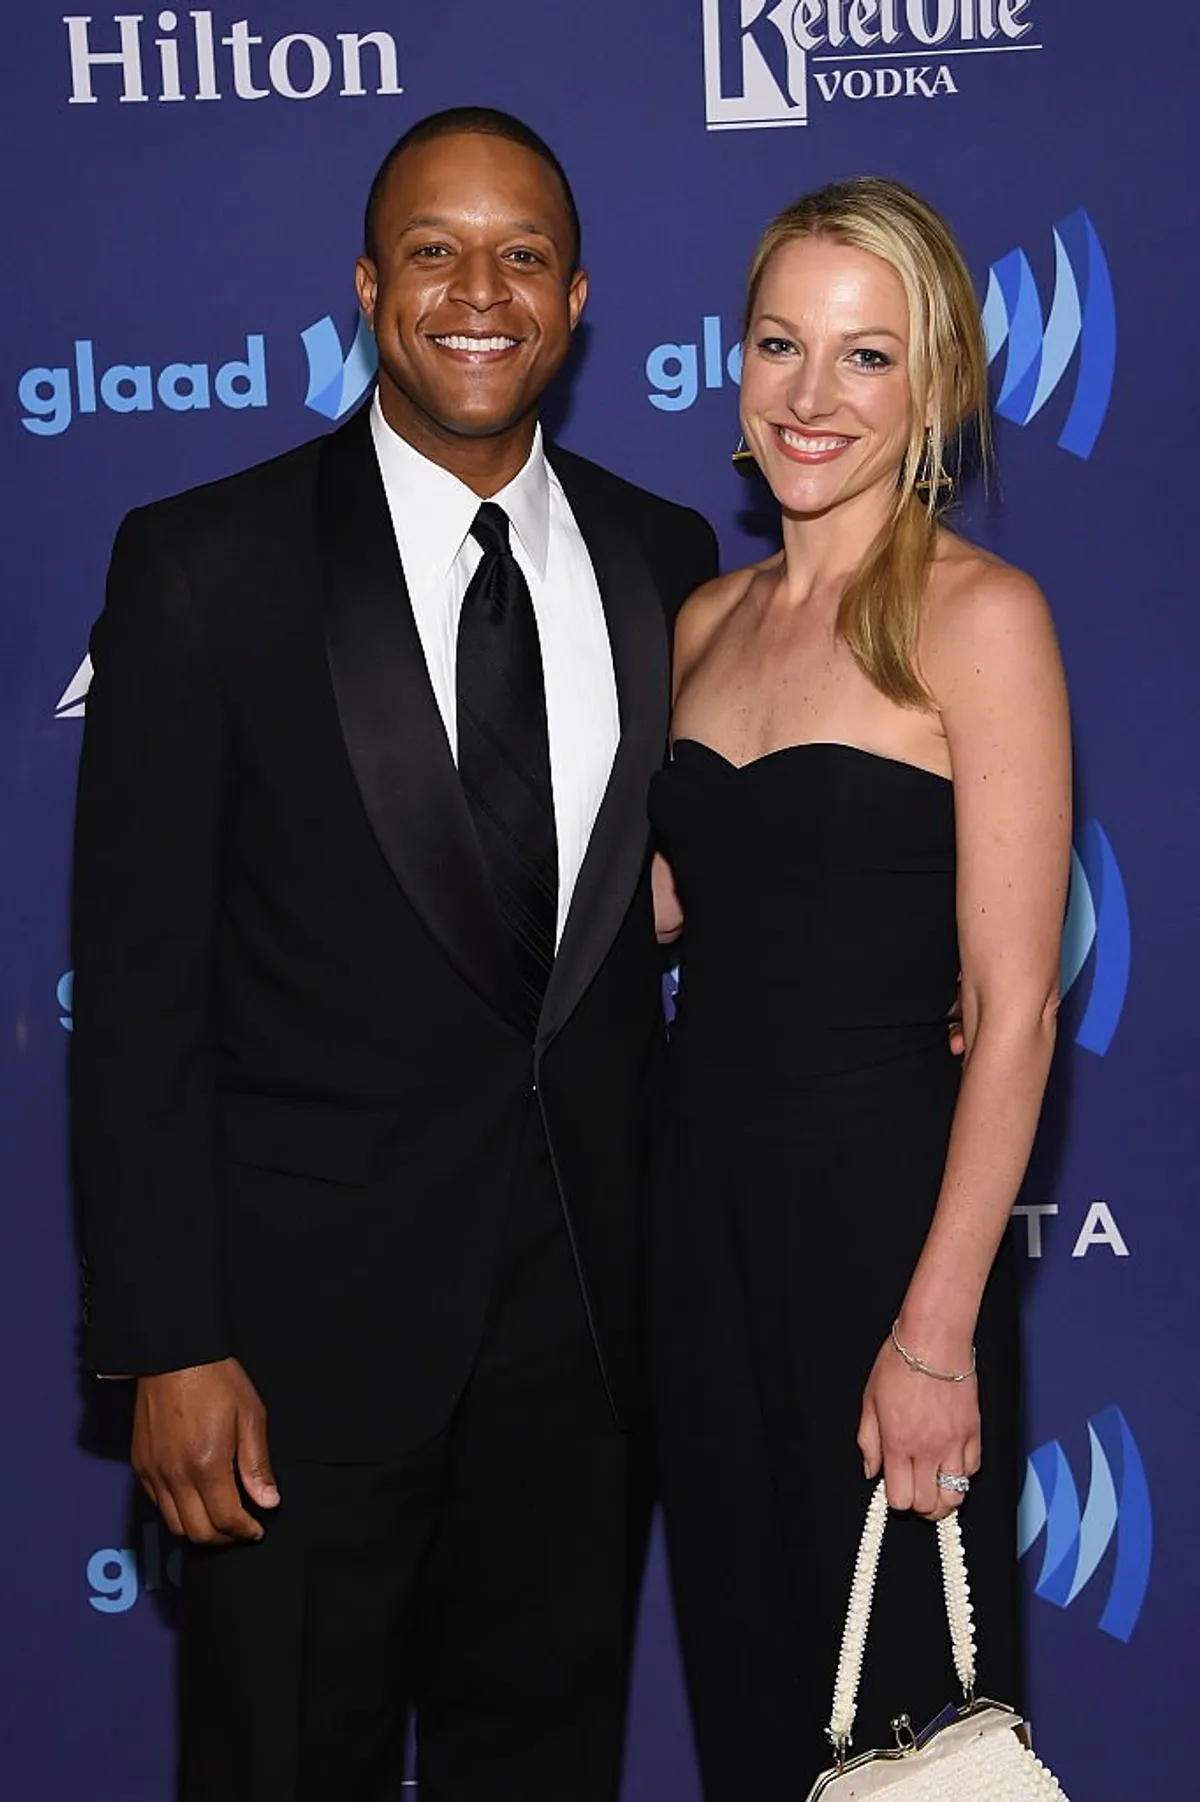 Craig Melvin and Lindsay Czarniak attend the 26th Annual GLAAD Media Awards In New York on May 9, 2015. | Photo: Getty Images